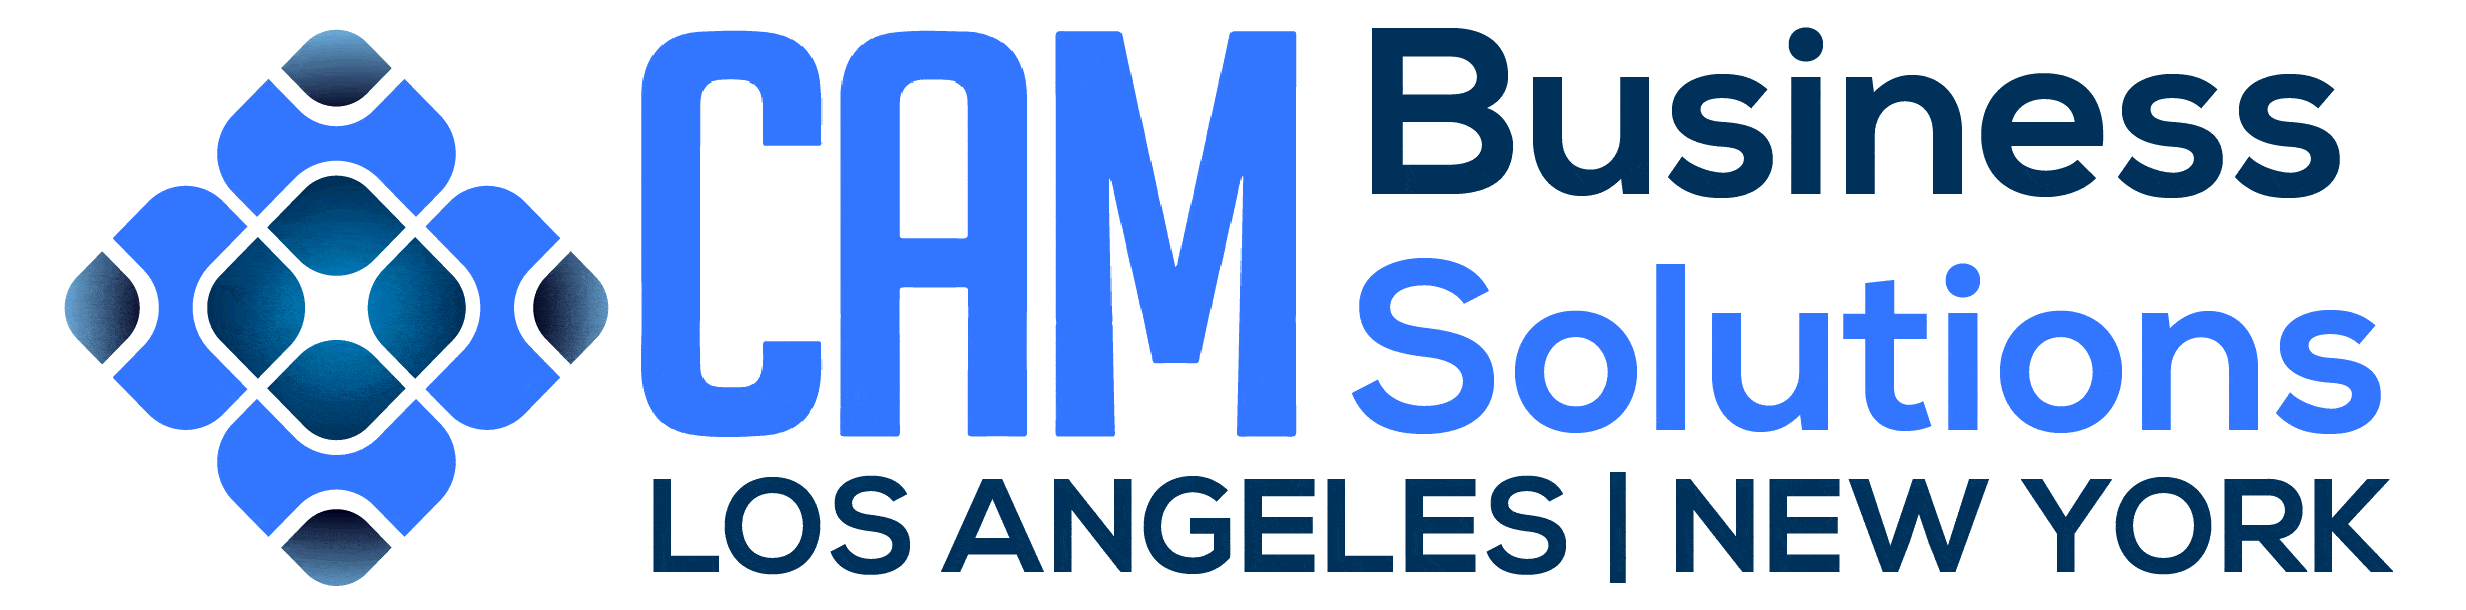 CAM Business Solutions